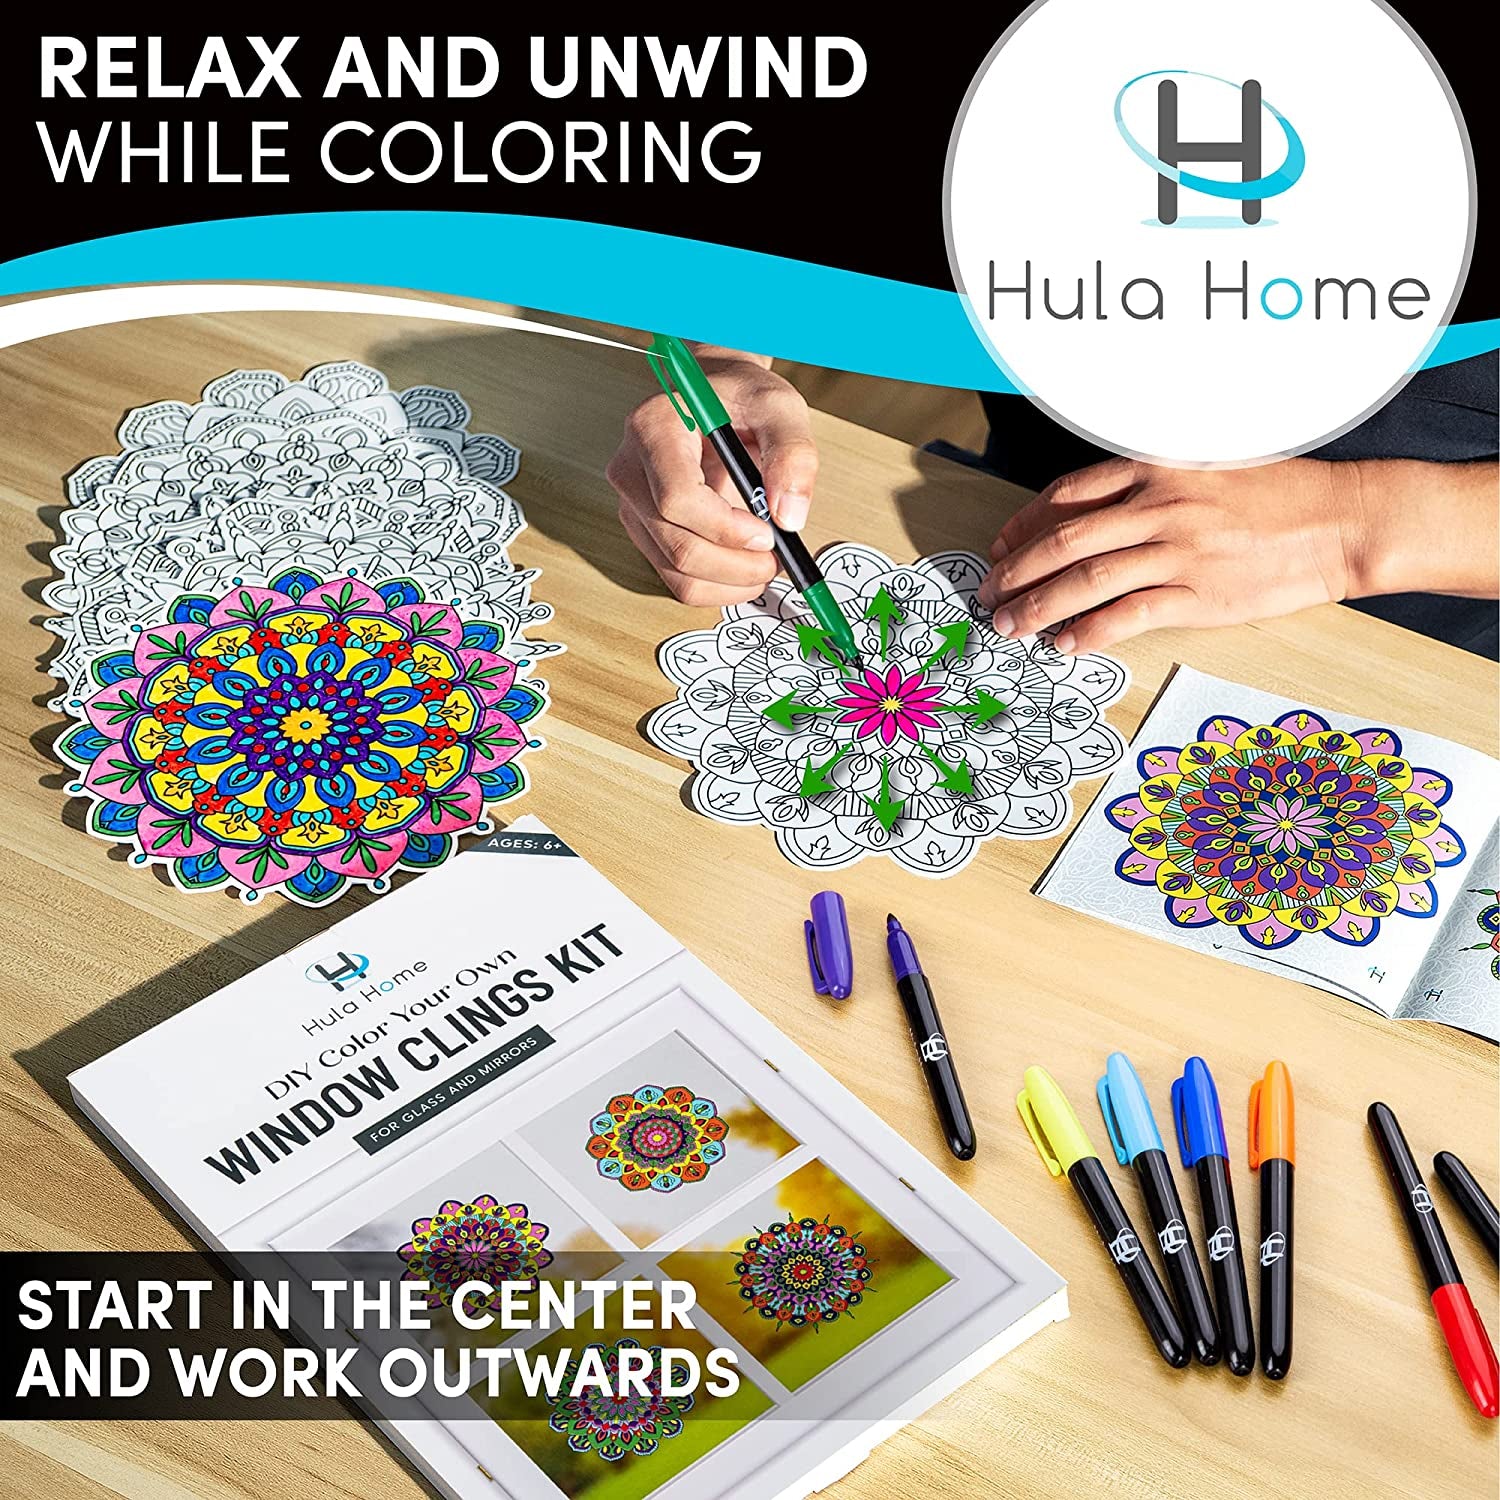 "Create Beautiful Stained Glass Mandalas at Home - Complete DIY Kit with Window Clings, Markers, and 10 Suncatchers - Perfect for All Ages and Skill Levels - Thoughtful Gift for Anyone!"